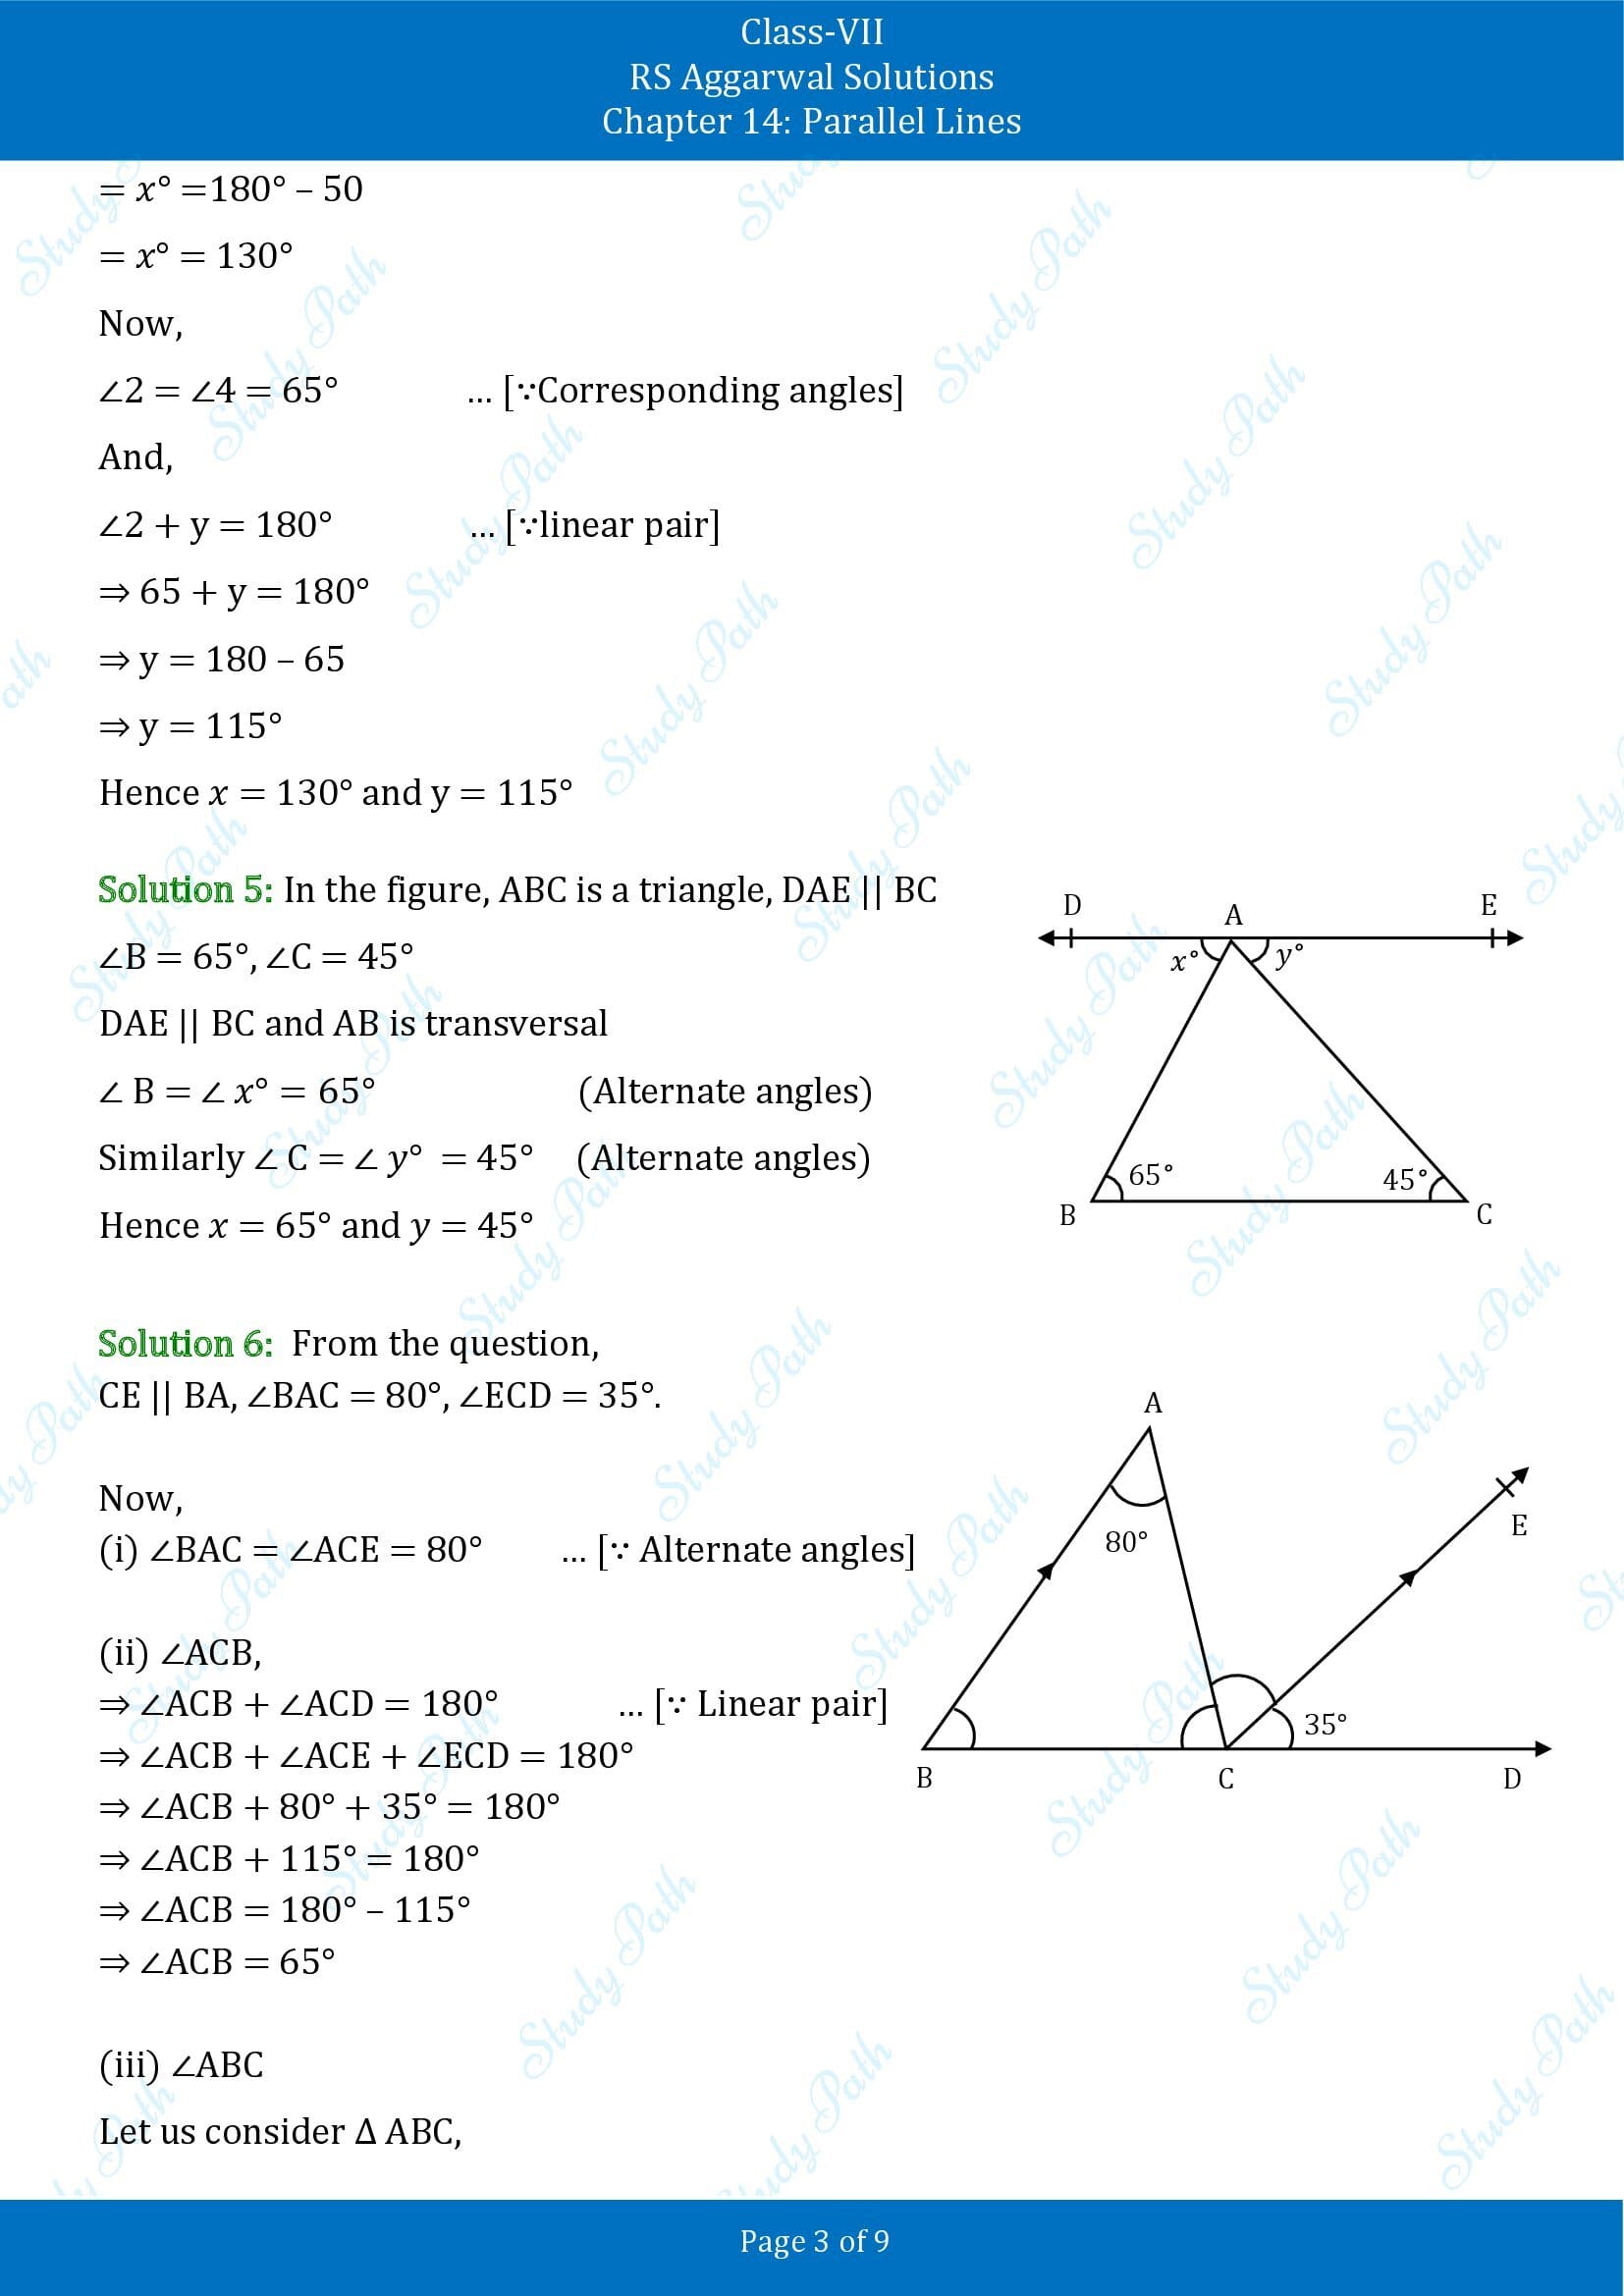 RS Aggarwal Solutions Class 7 Chapter 14 Parallel Lines 00003